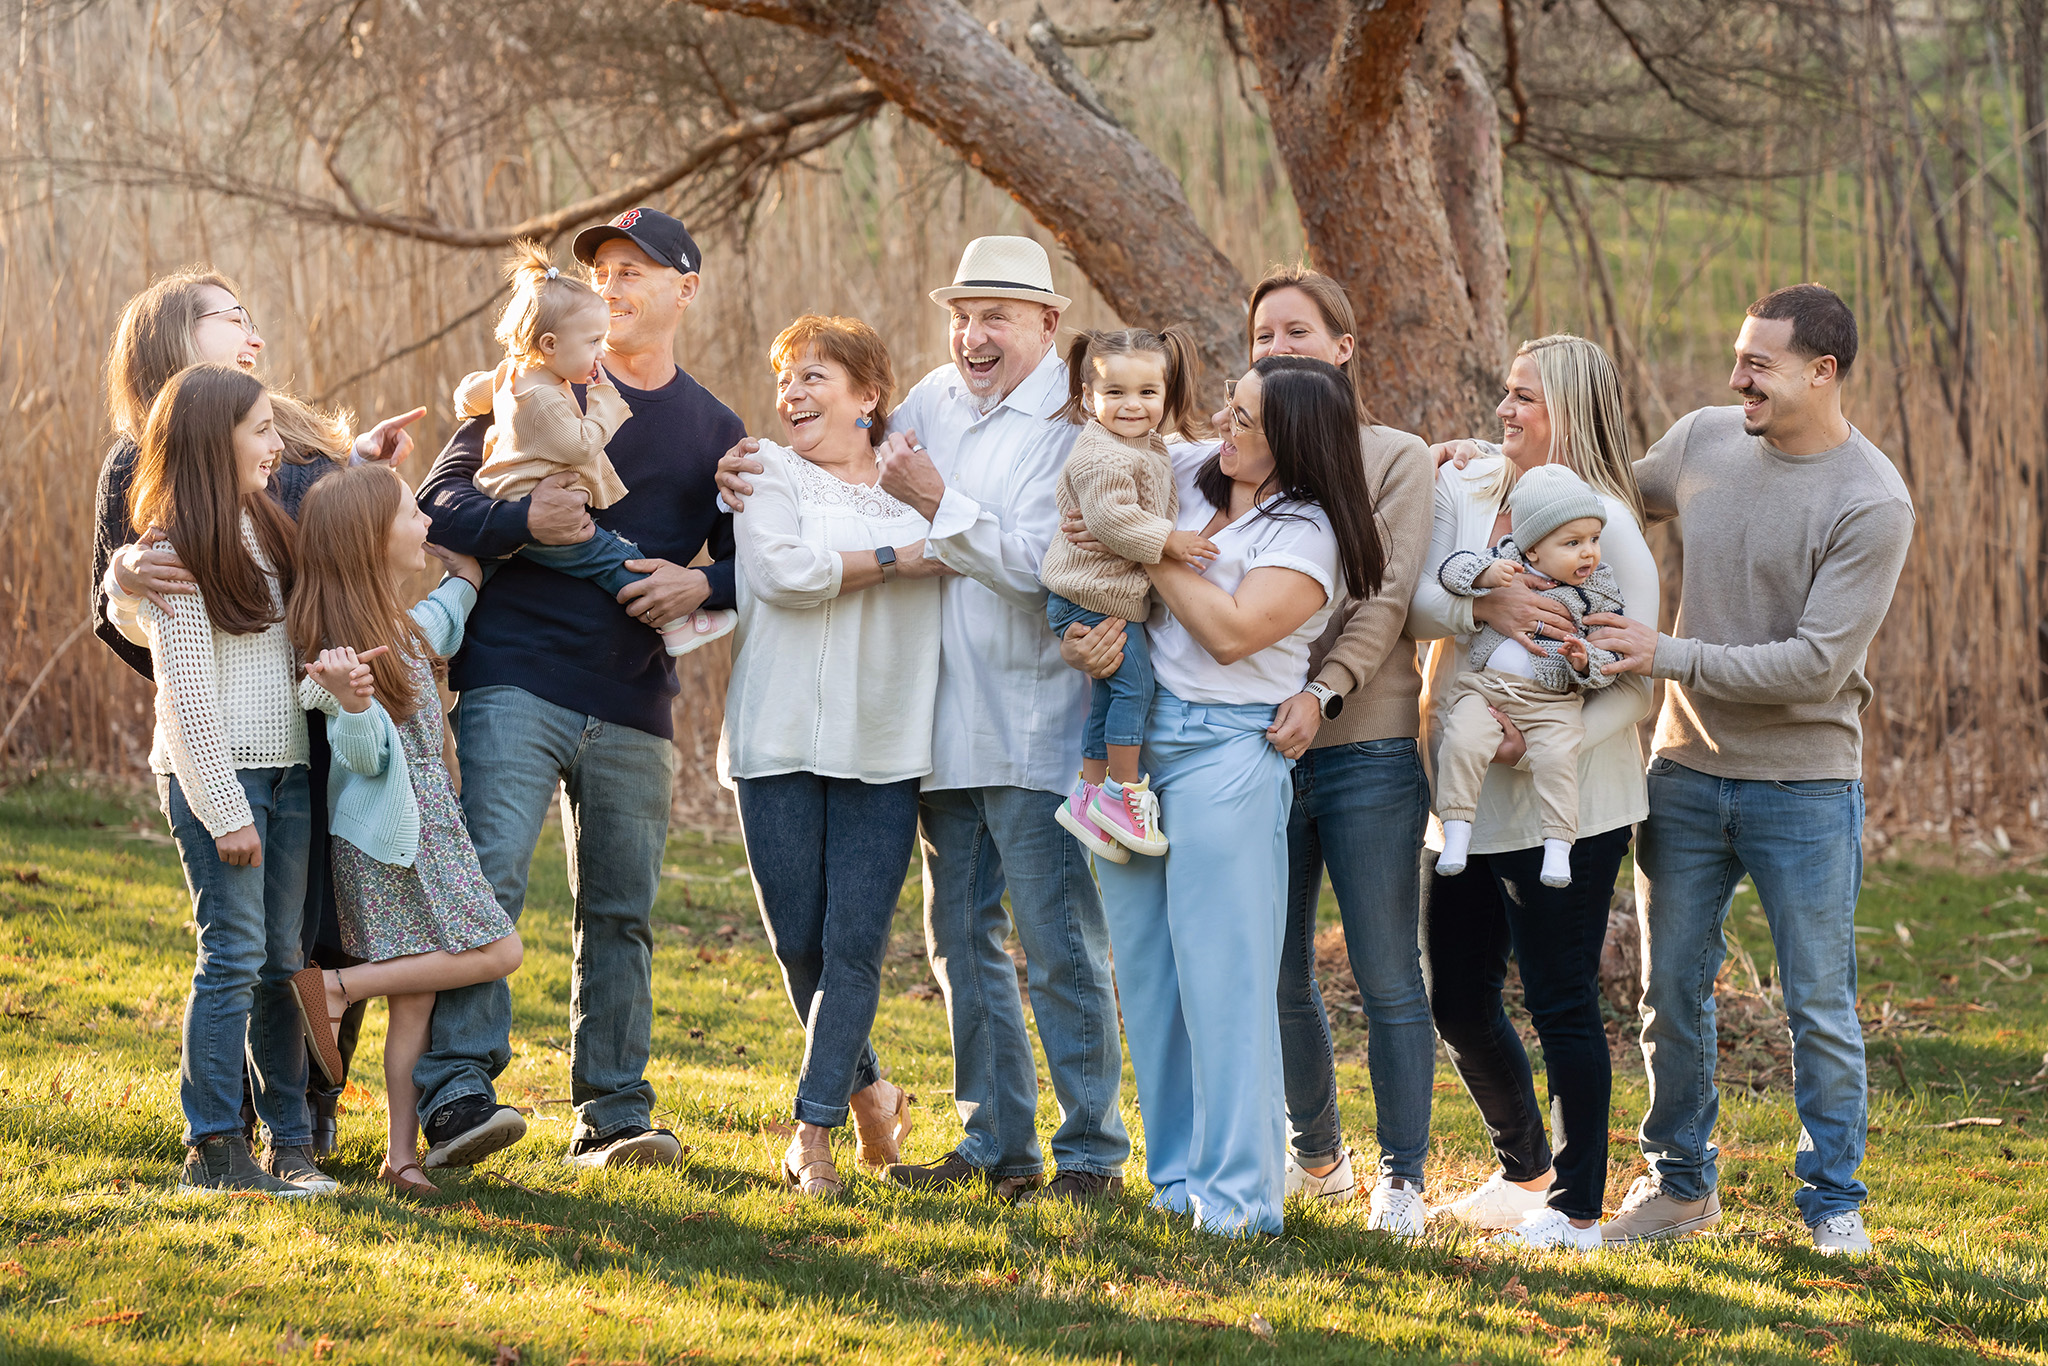 A large extended family laughs together while standing under a tree in a park at sunset